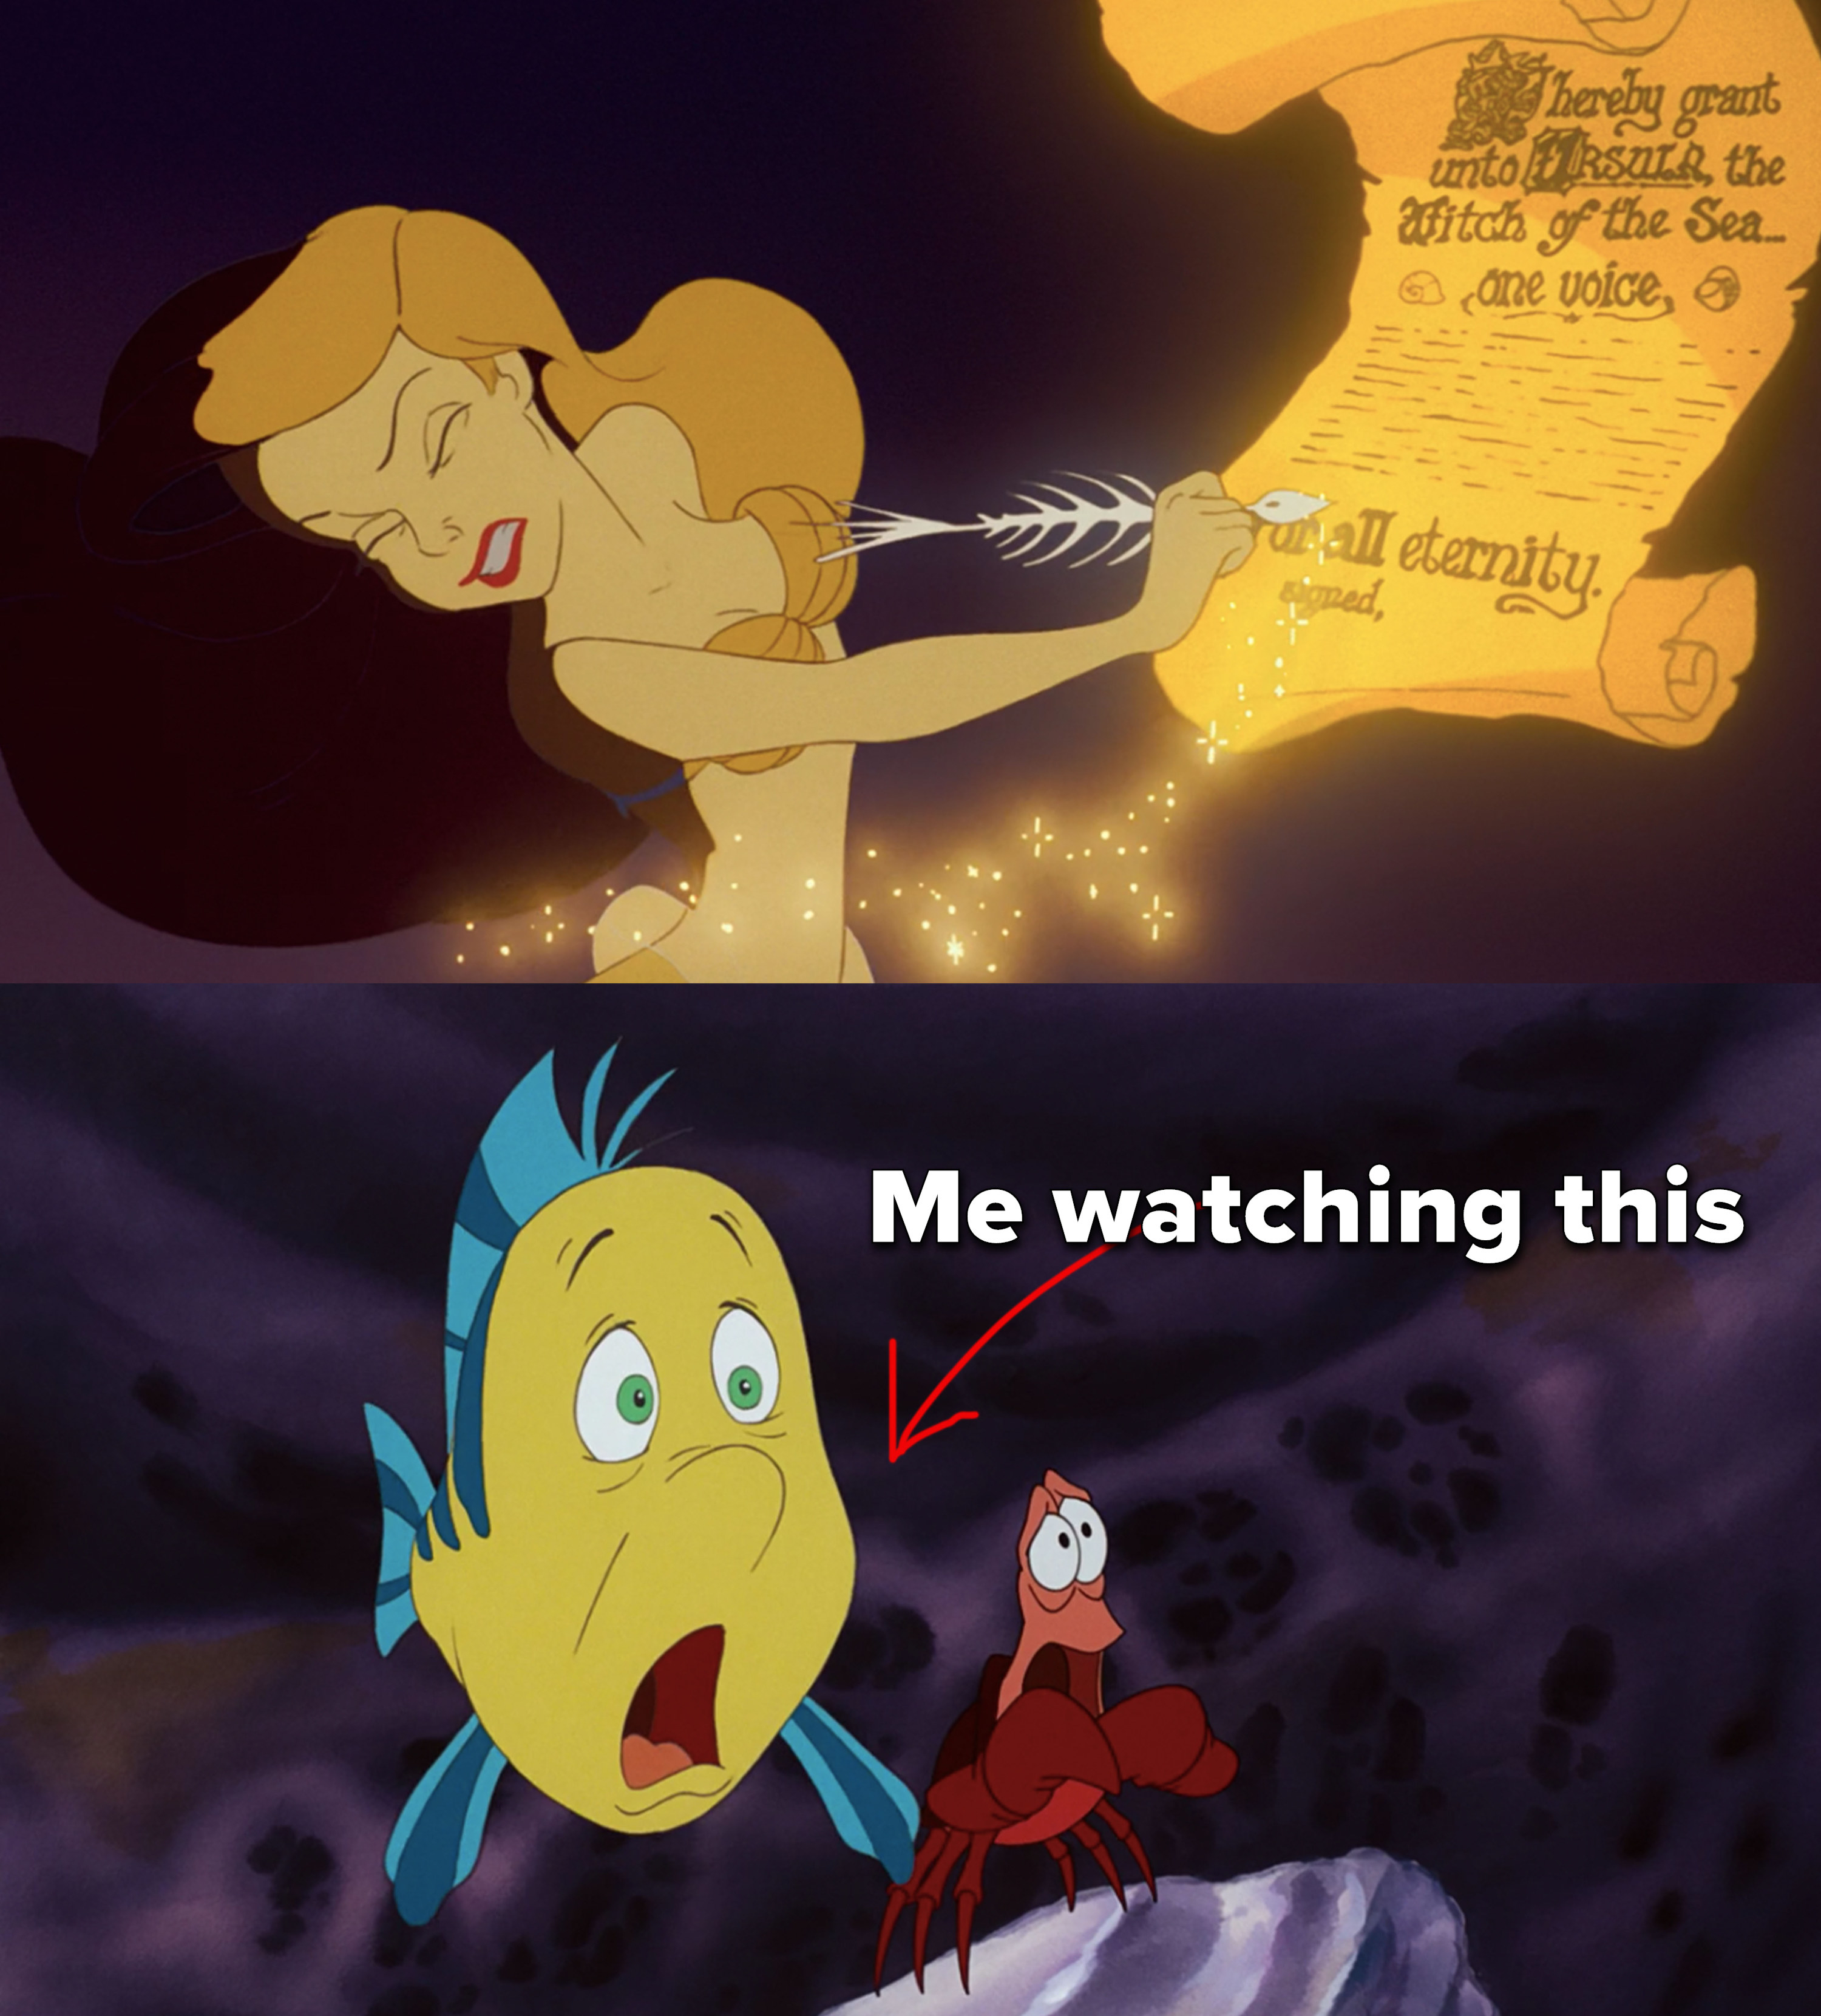 Ariel signing Ursula&#x27;s contract with her eyes closed, Flounder and Sebastian gasping, labeled, &quot;Me watching this&quot;